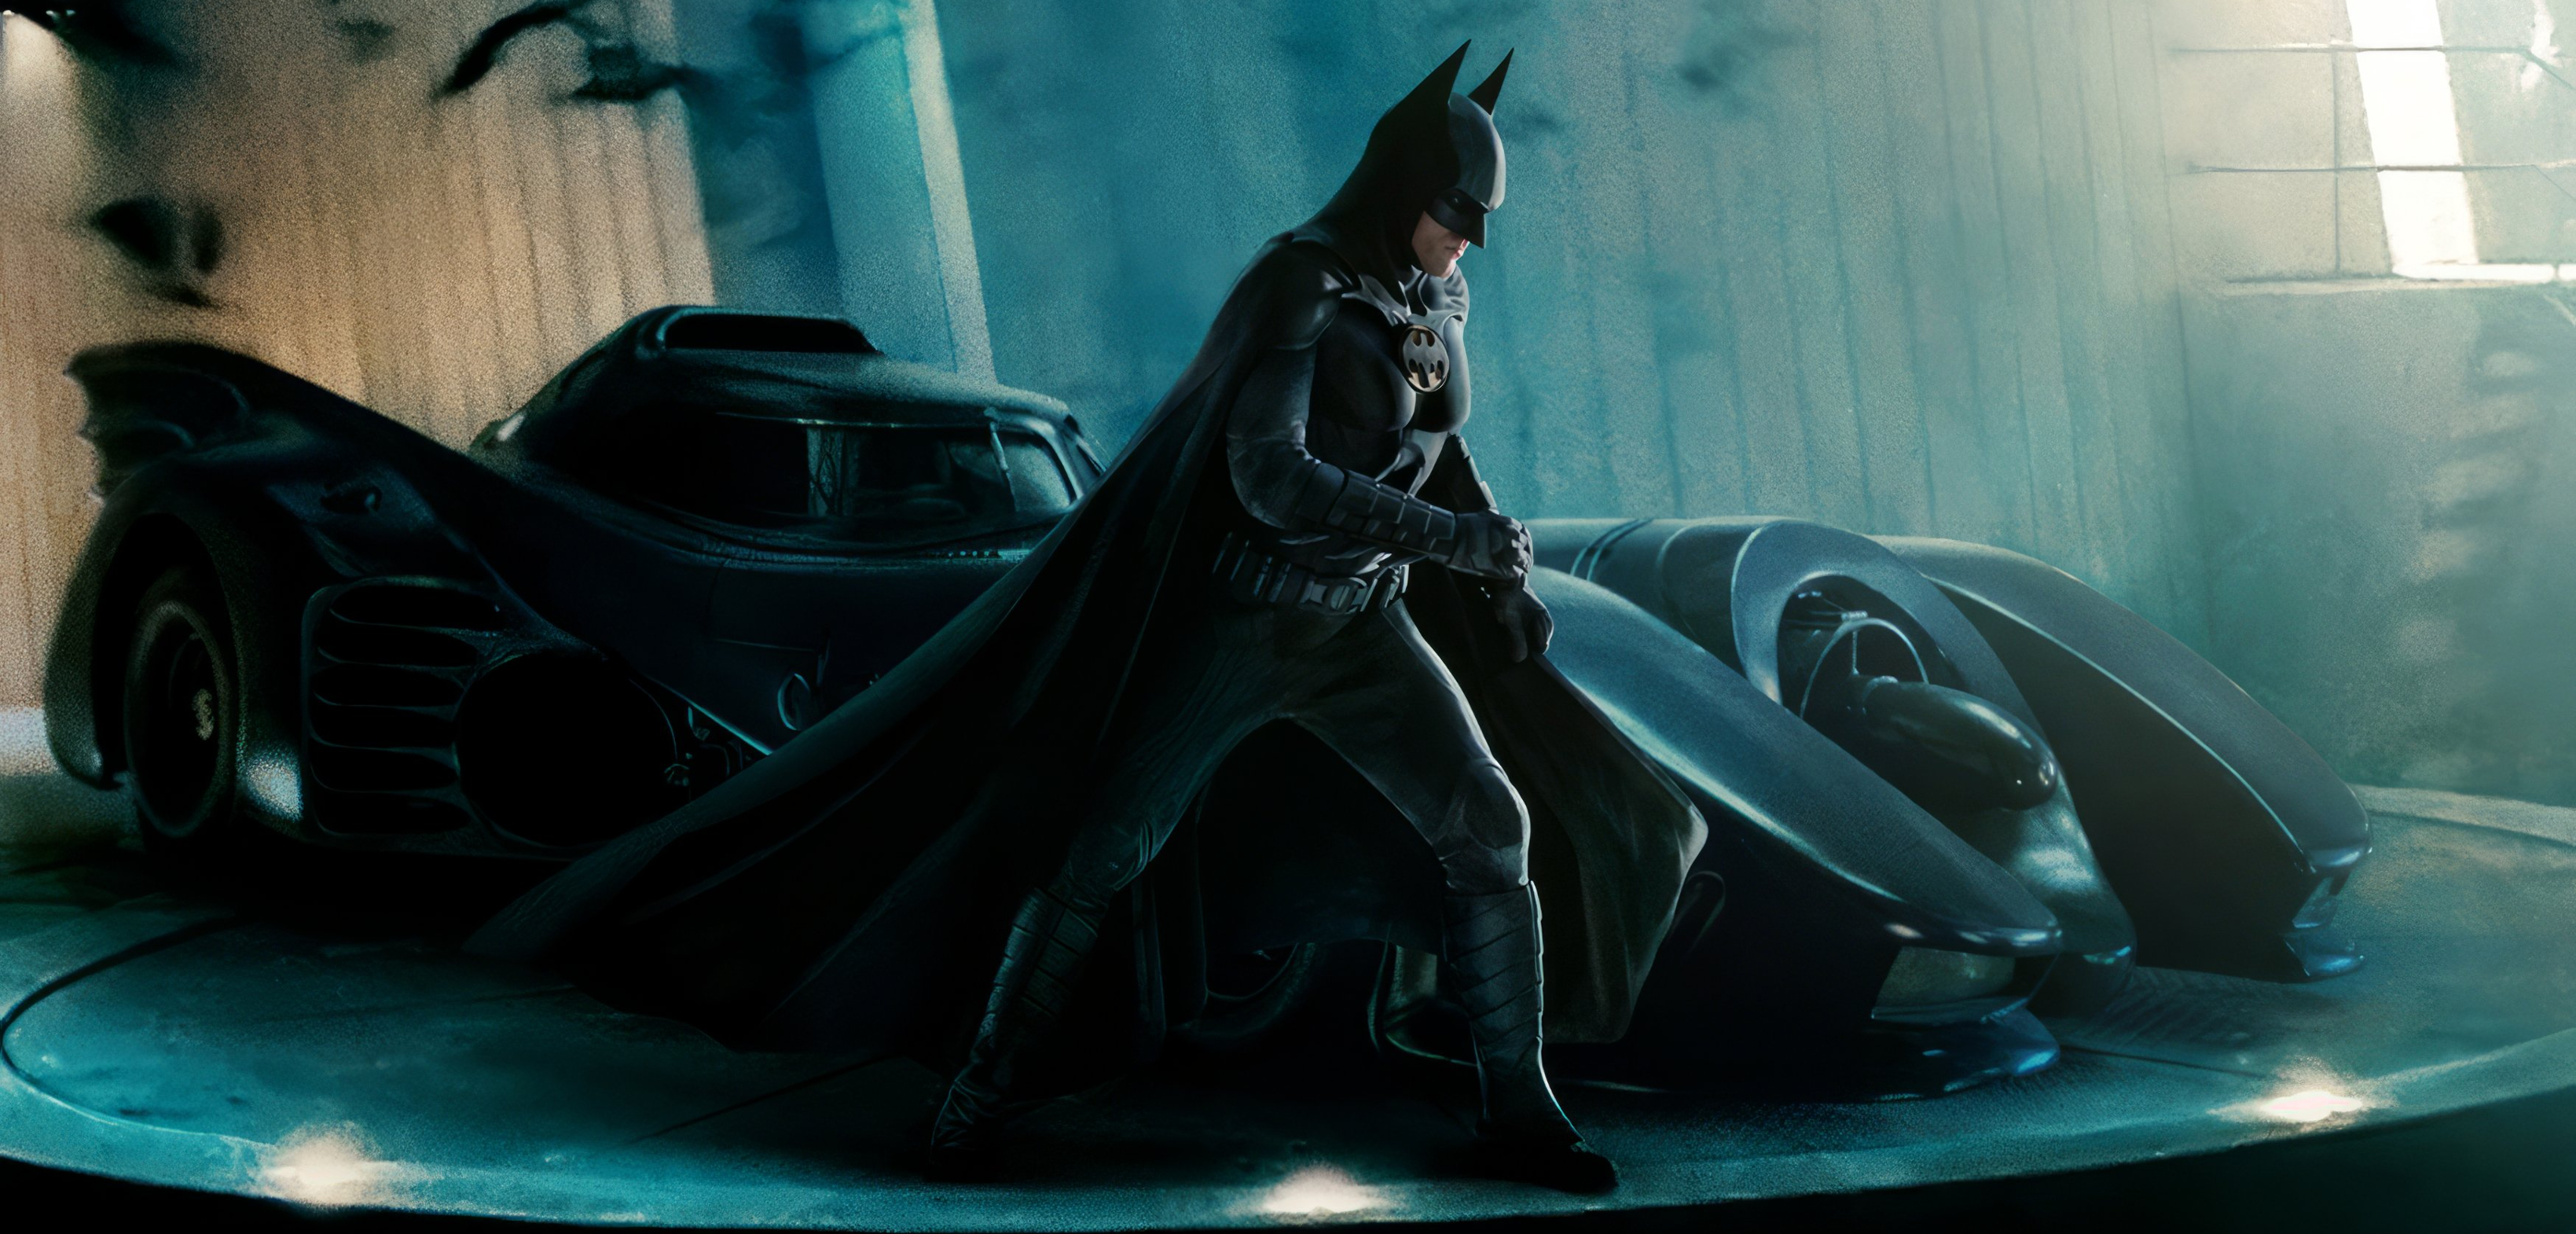 Batmobile, DC Extended Universe Wiki